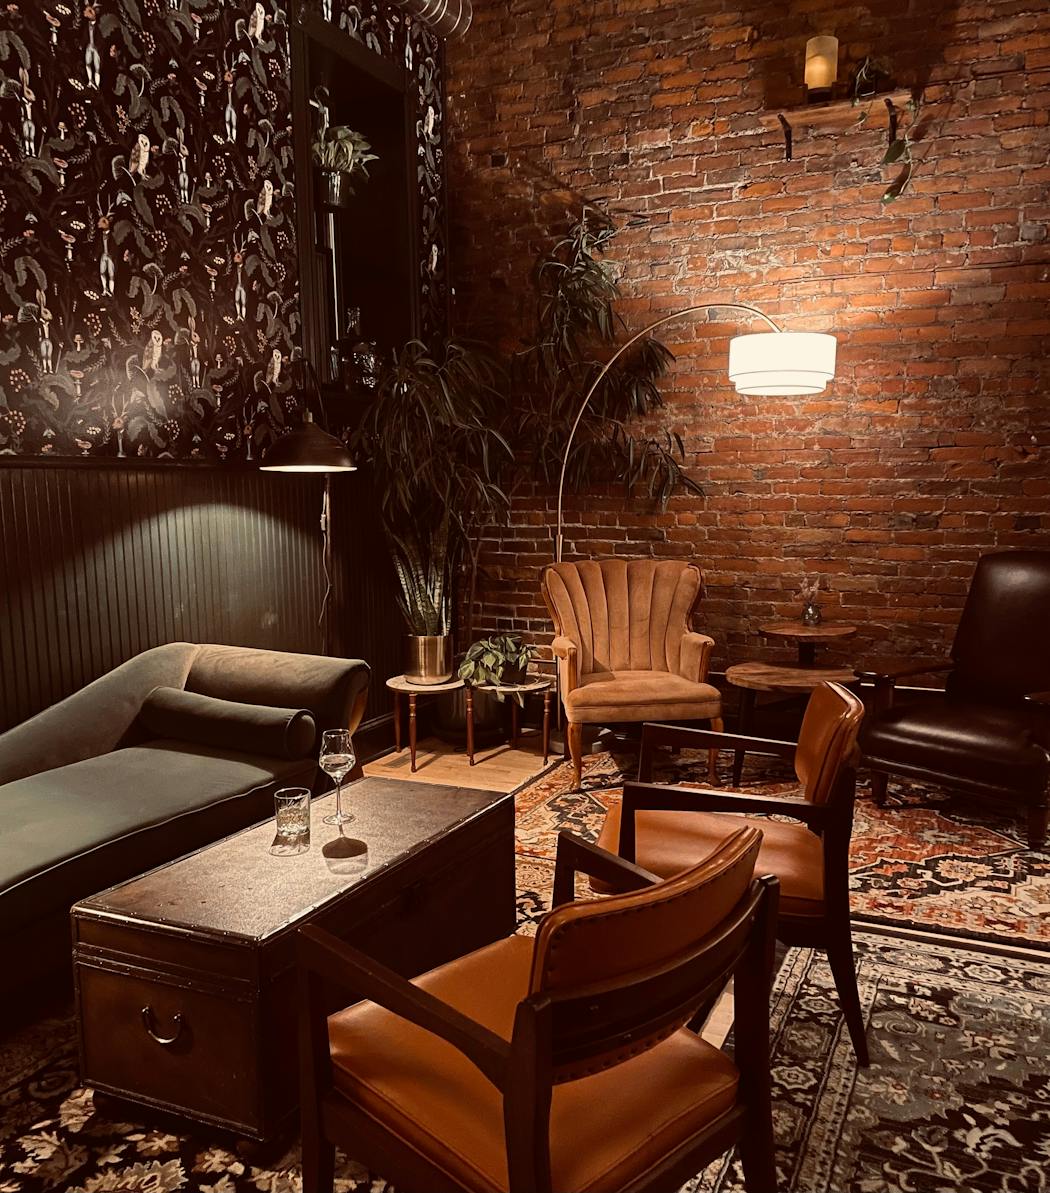 With owl-adorned wallpaper, brick walls and plenty of greenery, Emerald Lounge feels like a sophisticated cocktail lounge for bookish souls.